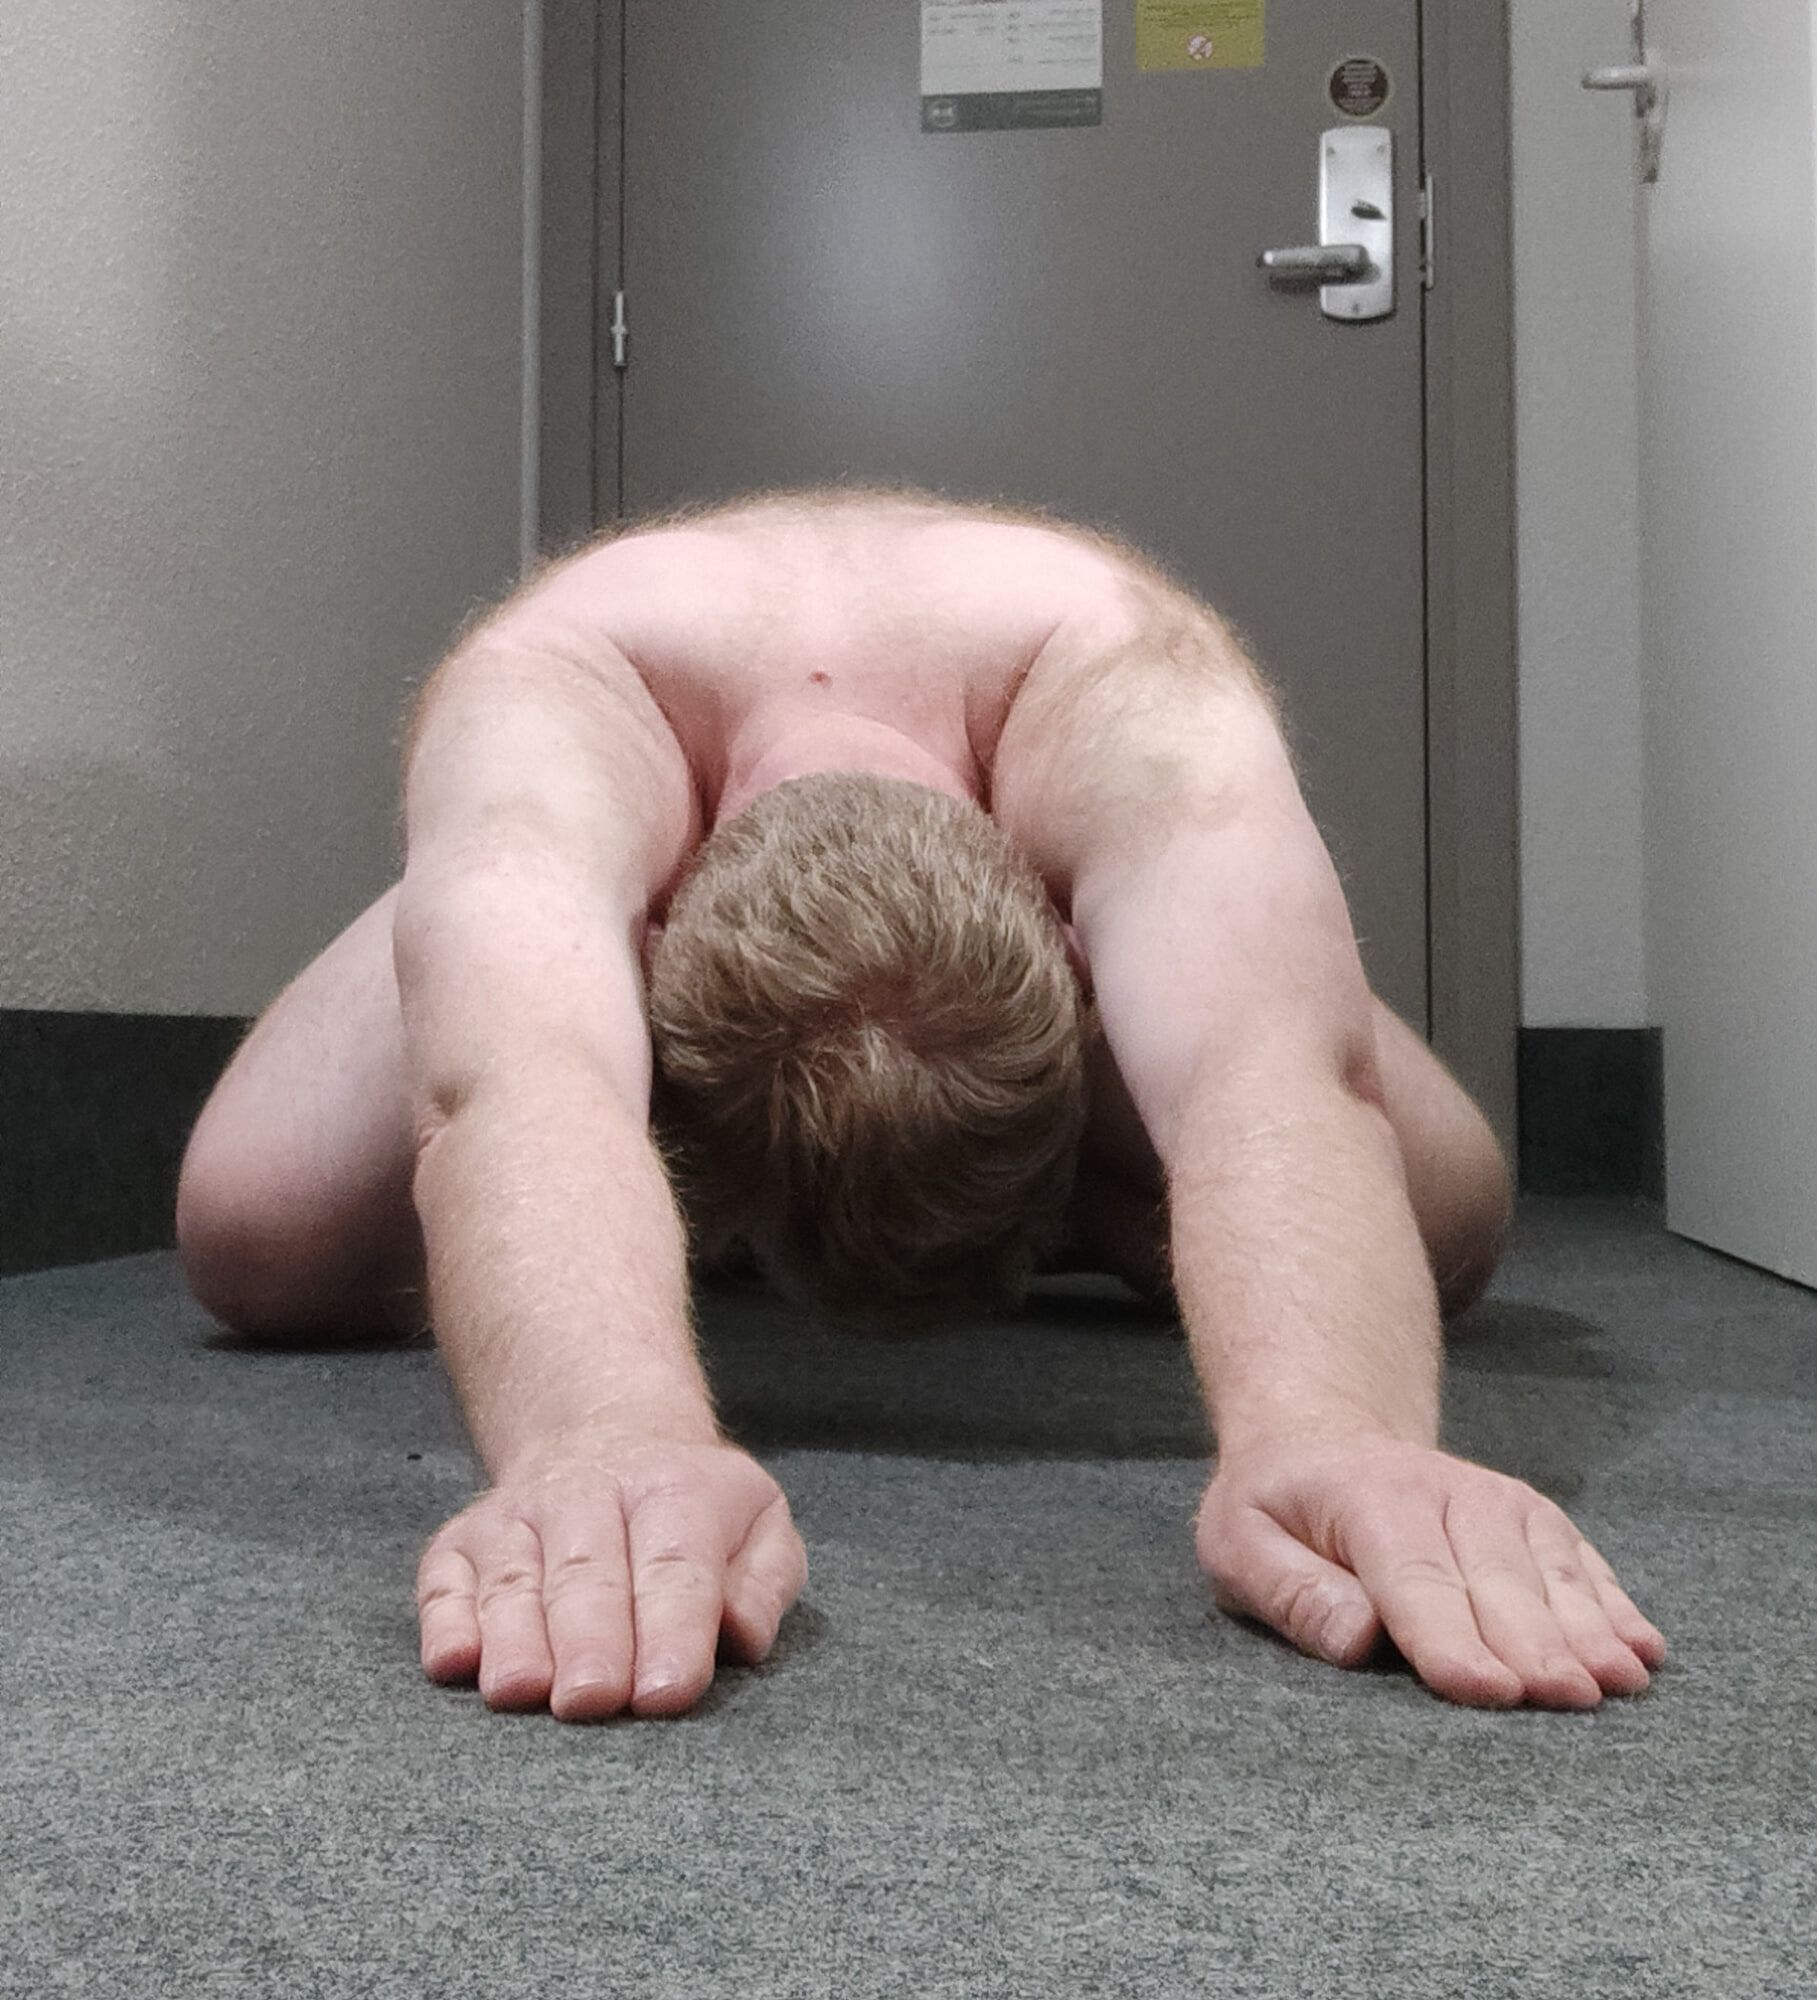 Submission positions #12